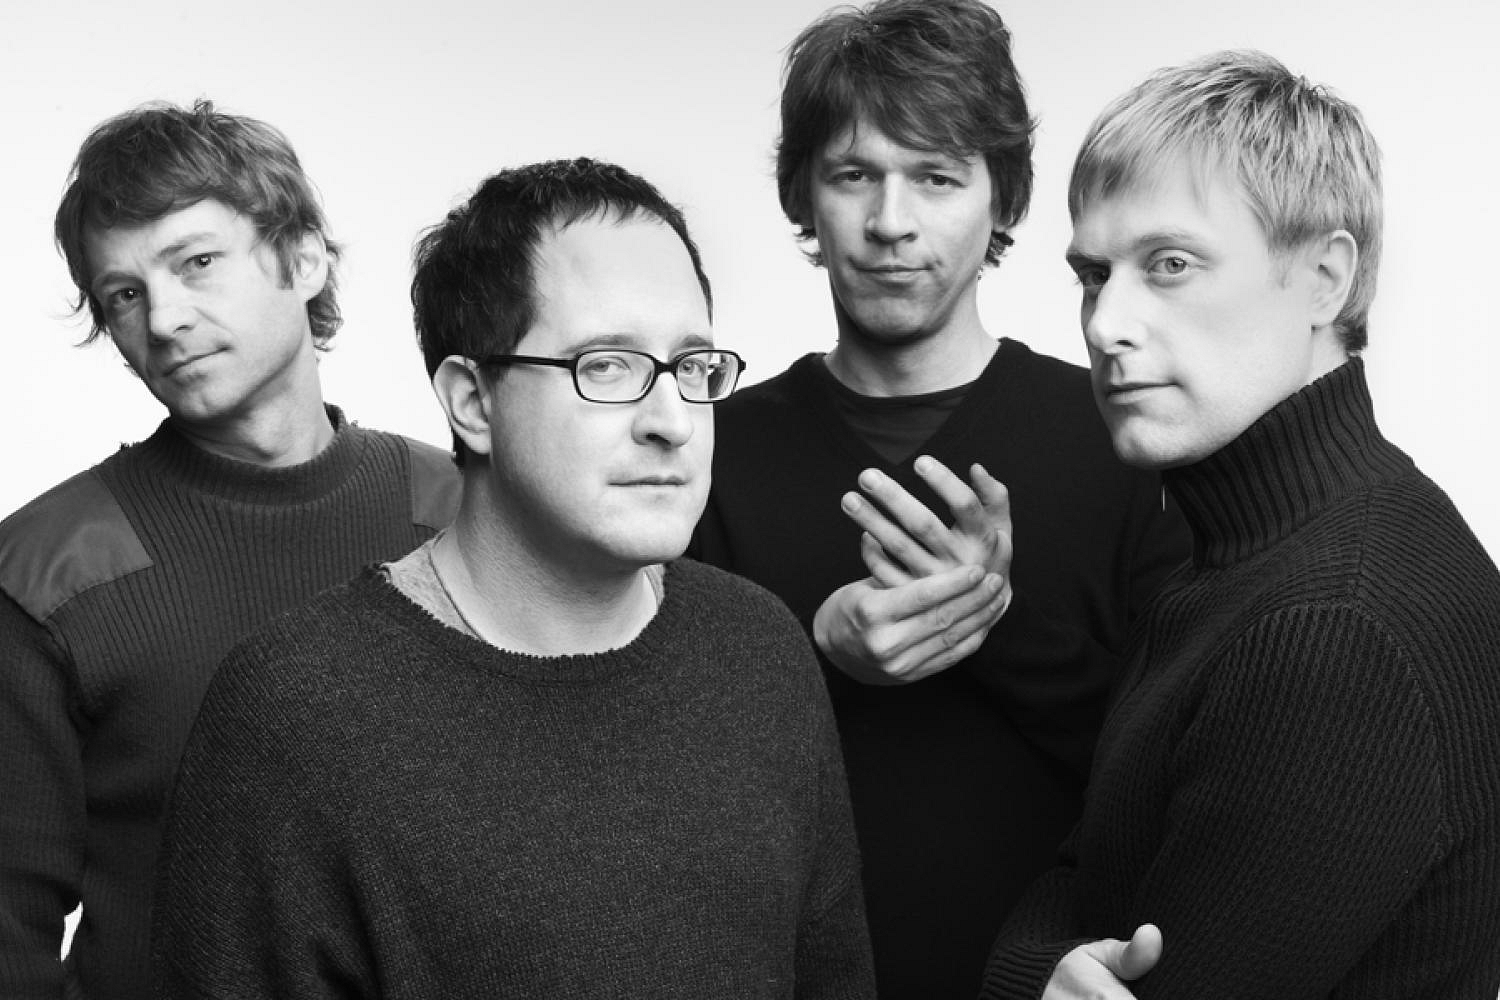 The Hold Steady announce details of new album ‘Thrashing Thru The Passion’, plus new single ‘Denver Haircut’